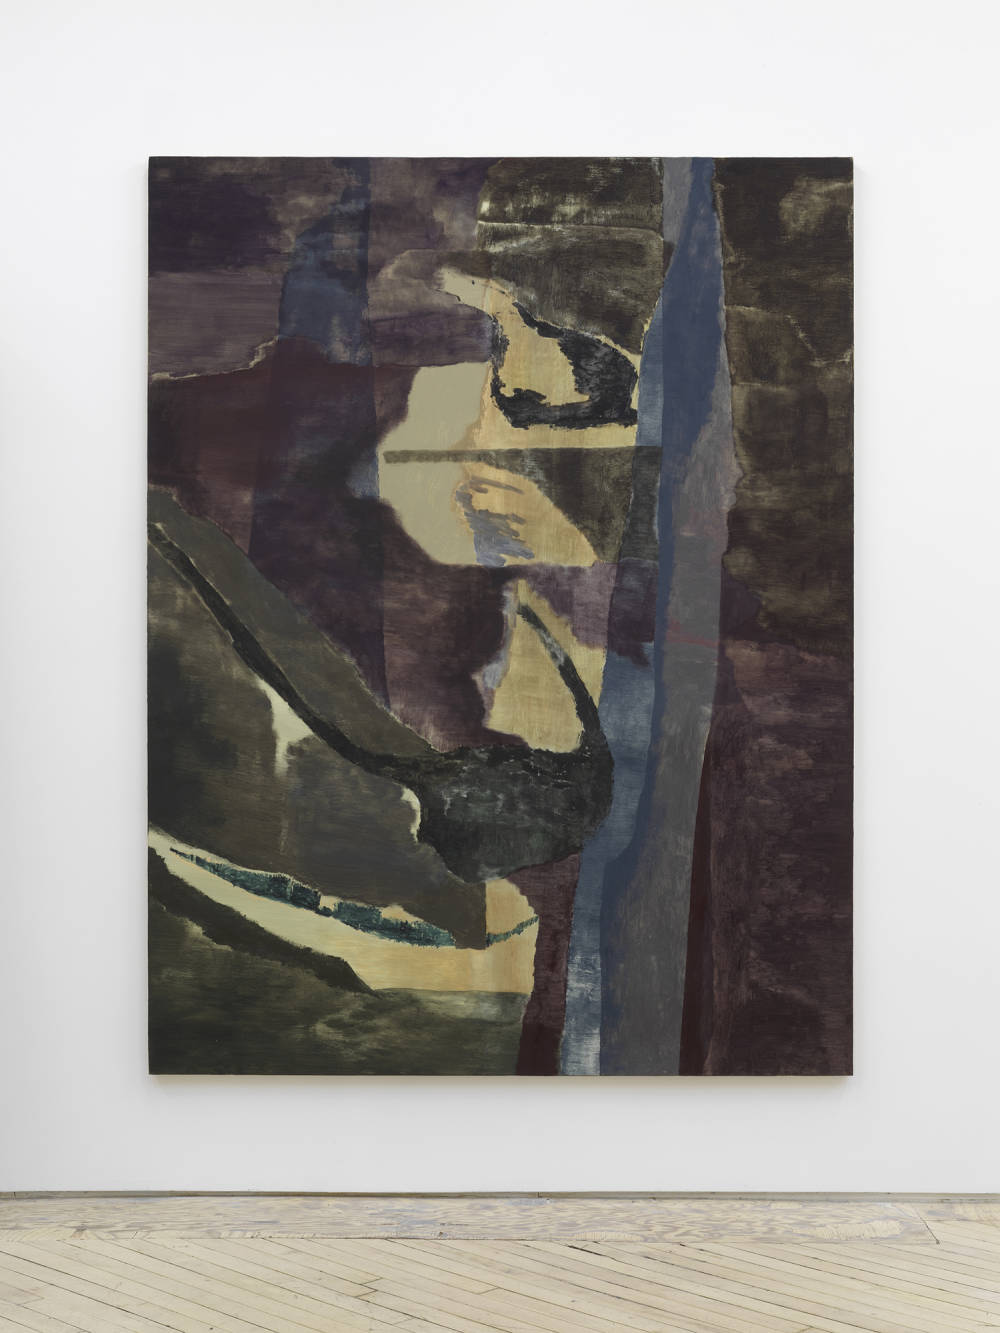 A large, gestural abstract painting rendered a range of muted earth tones installed on a gallery wall.